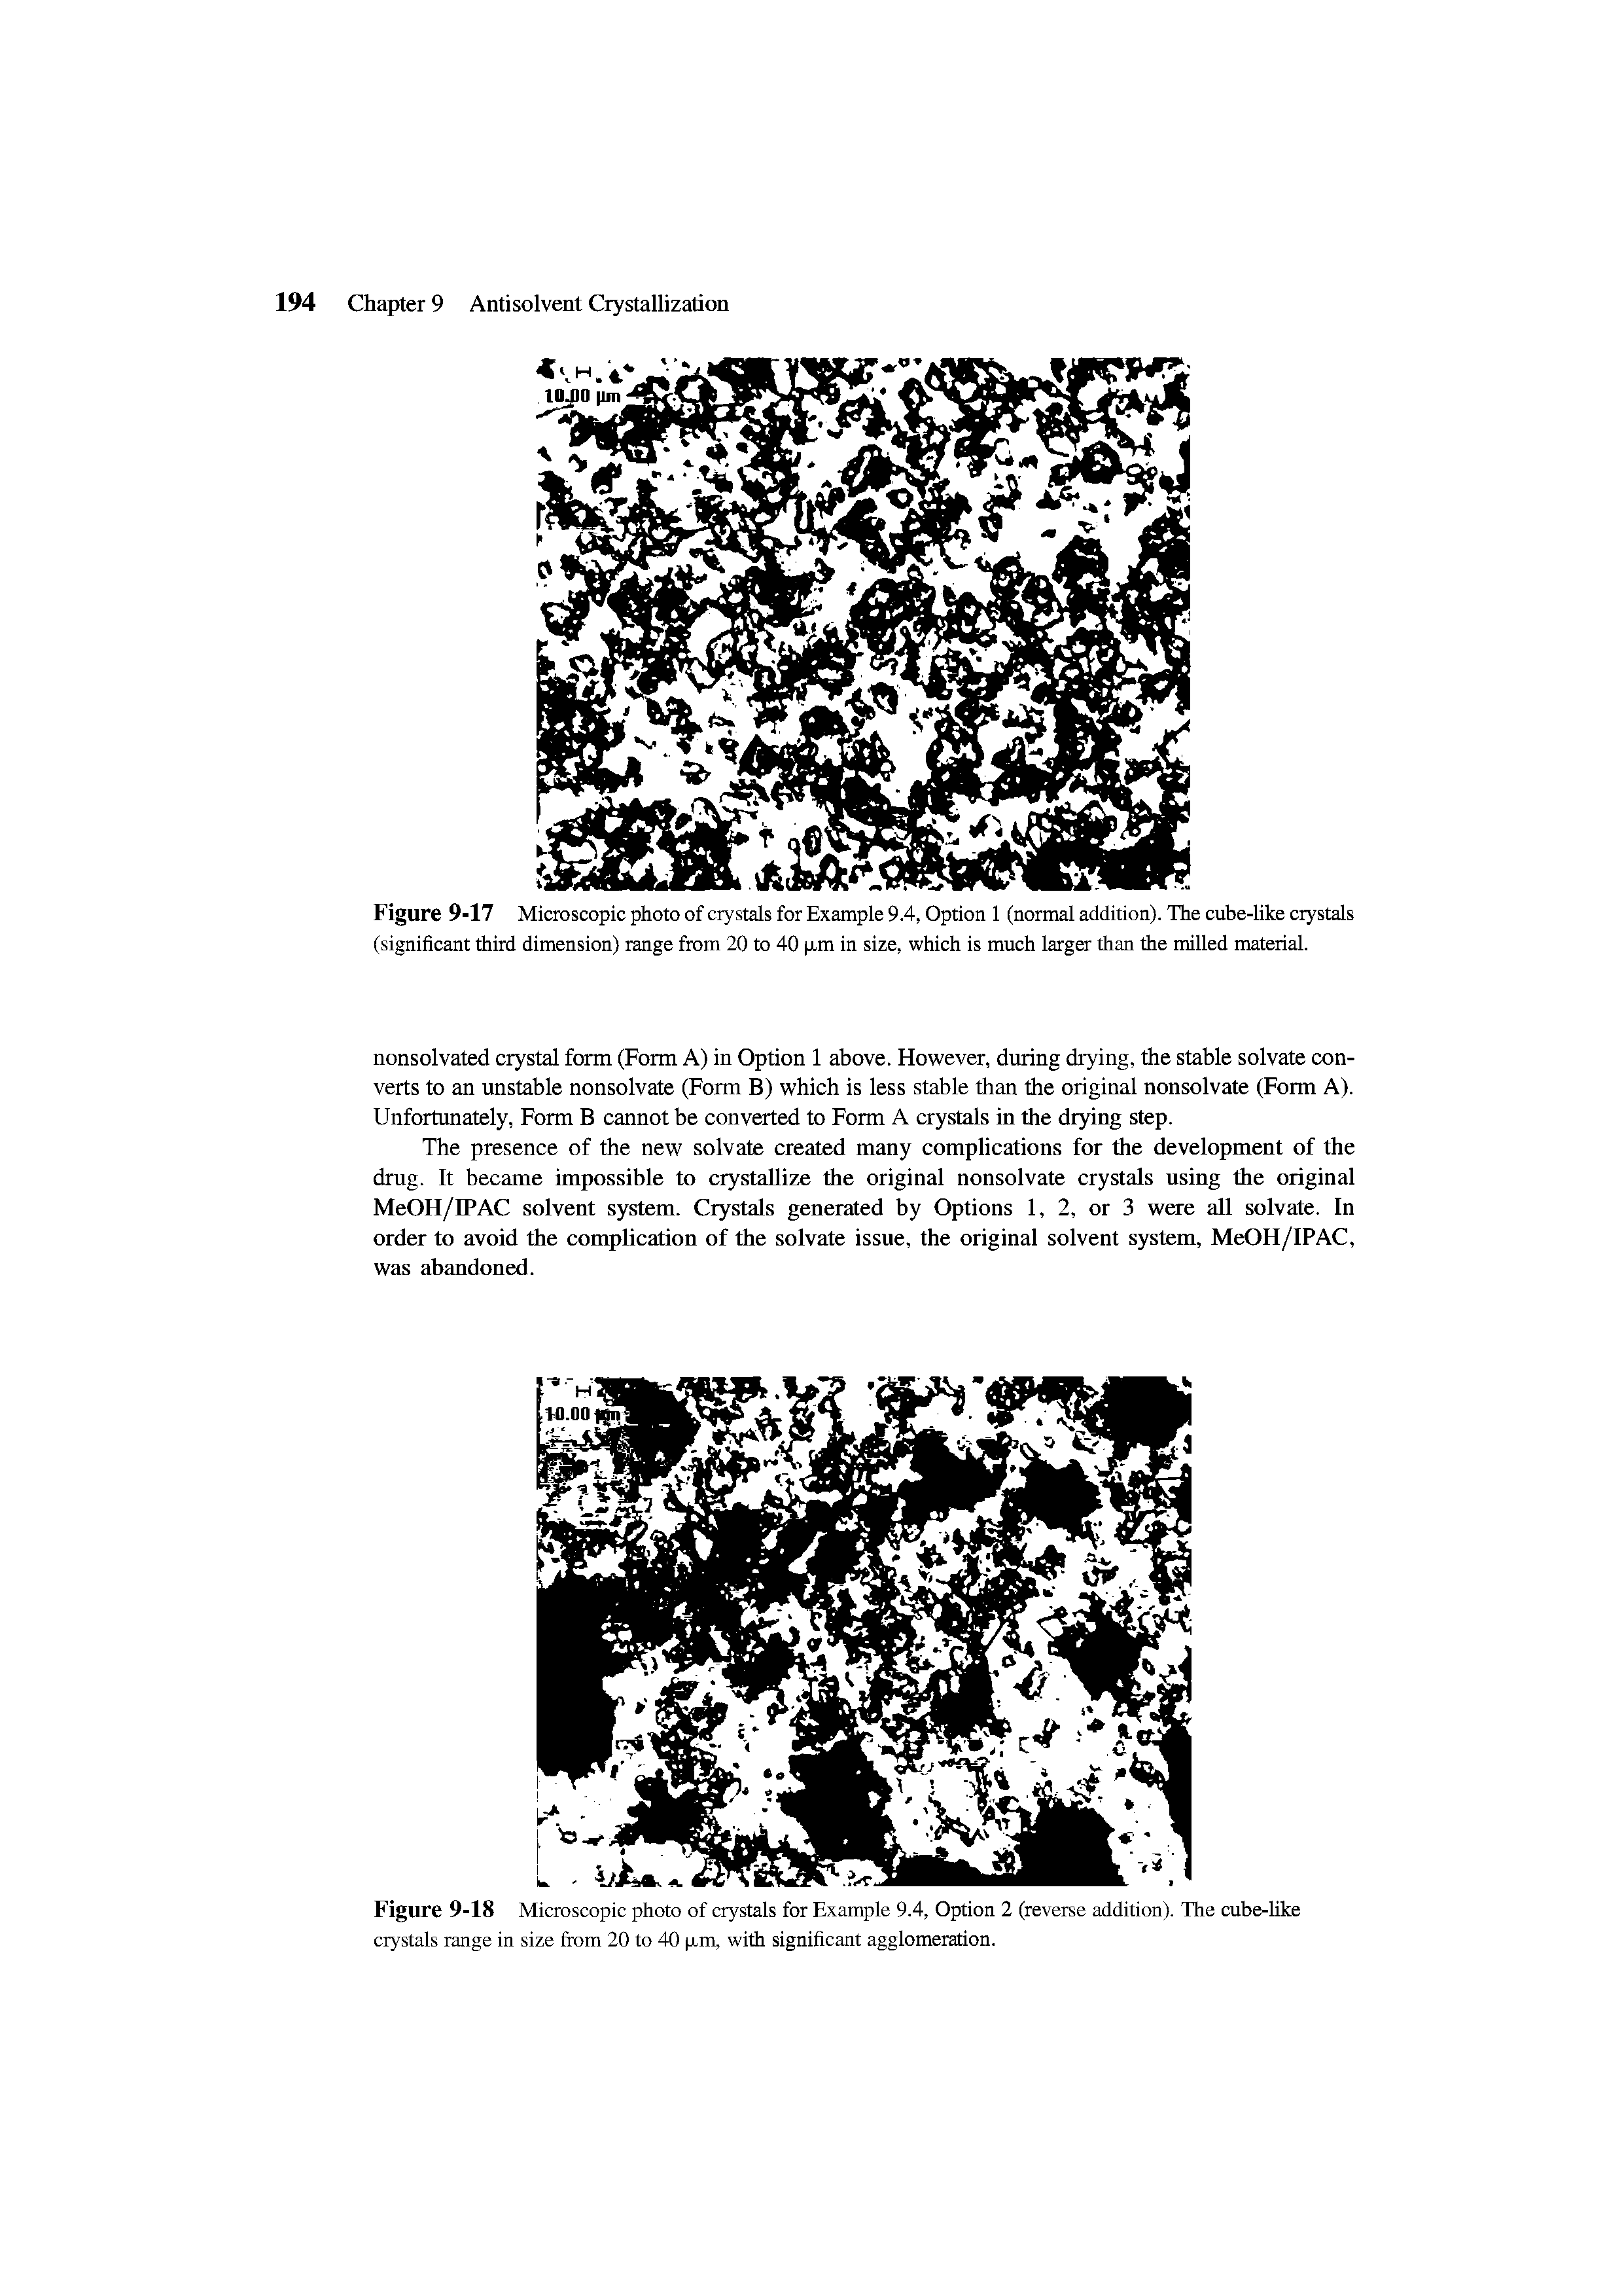 Figure 9-18 Microscopic photo of crystals for Example 9.4, Option 2 (reverse addition). The cube-like crystals range in size from 20 to 40 pim. with significant agglomeration.